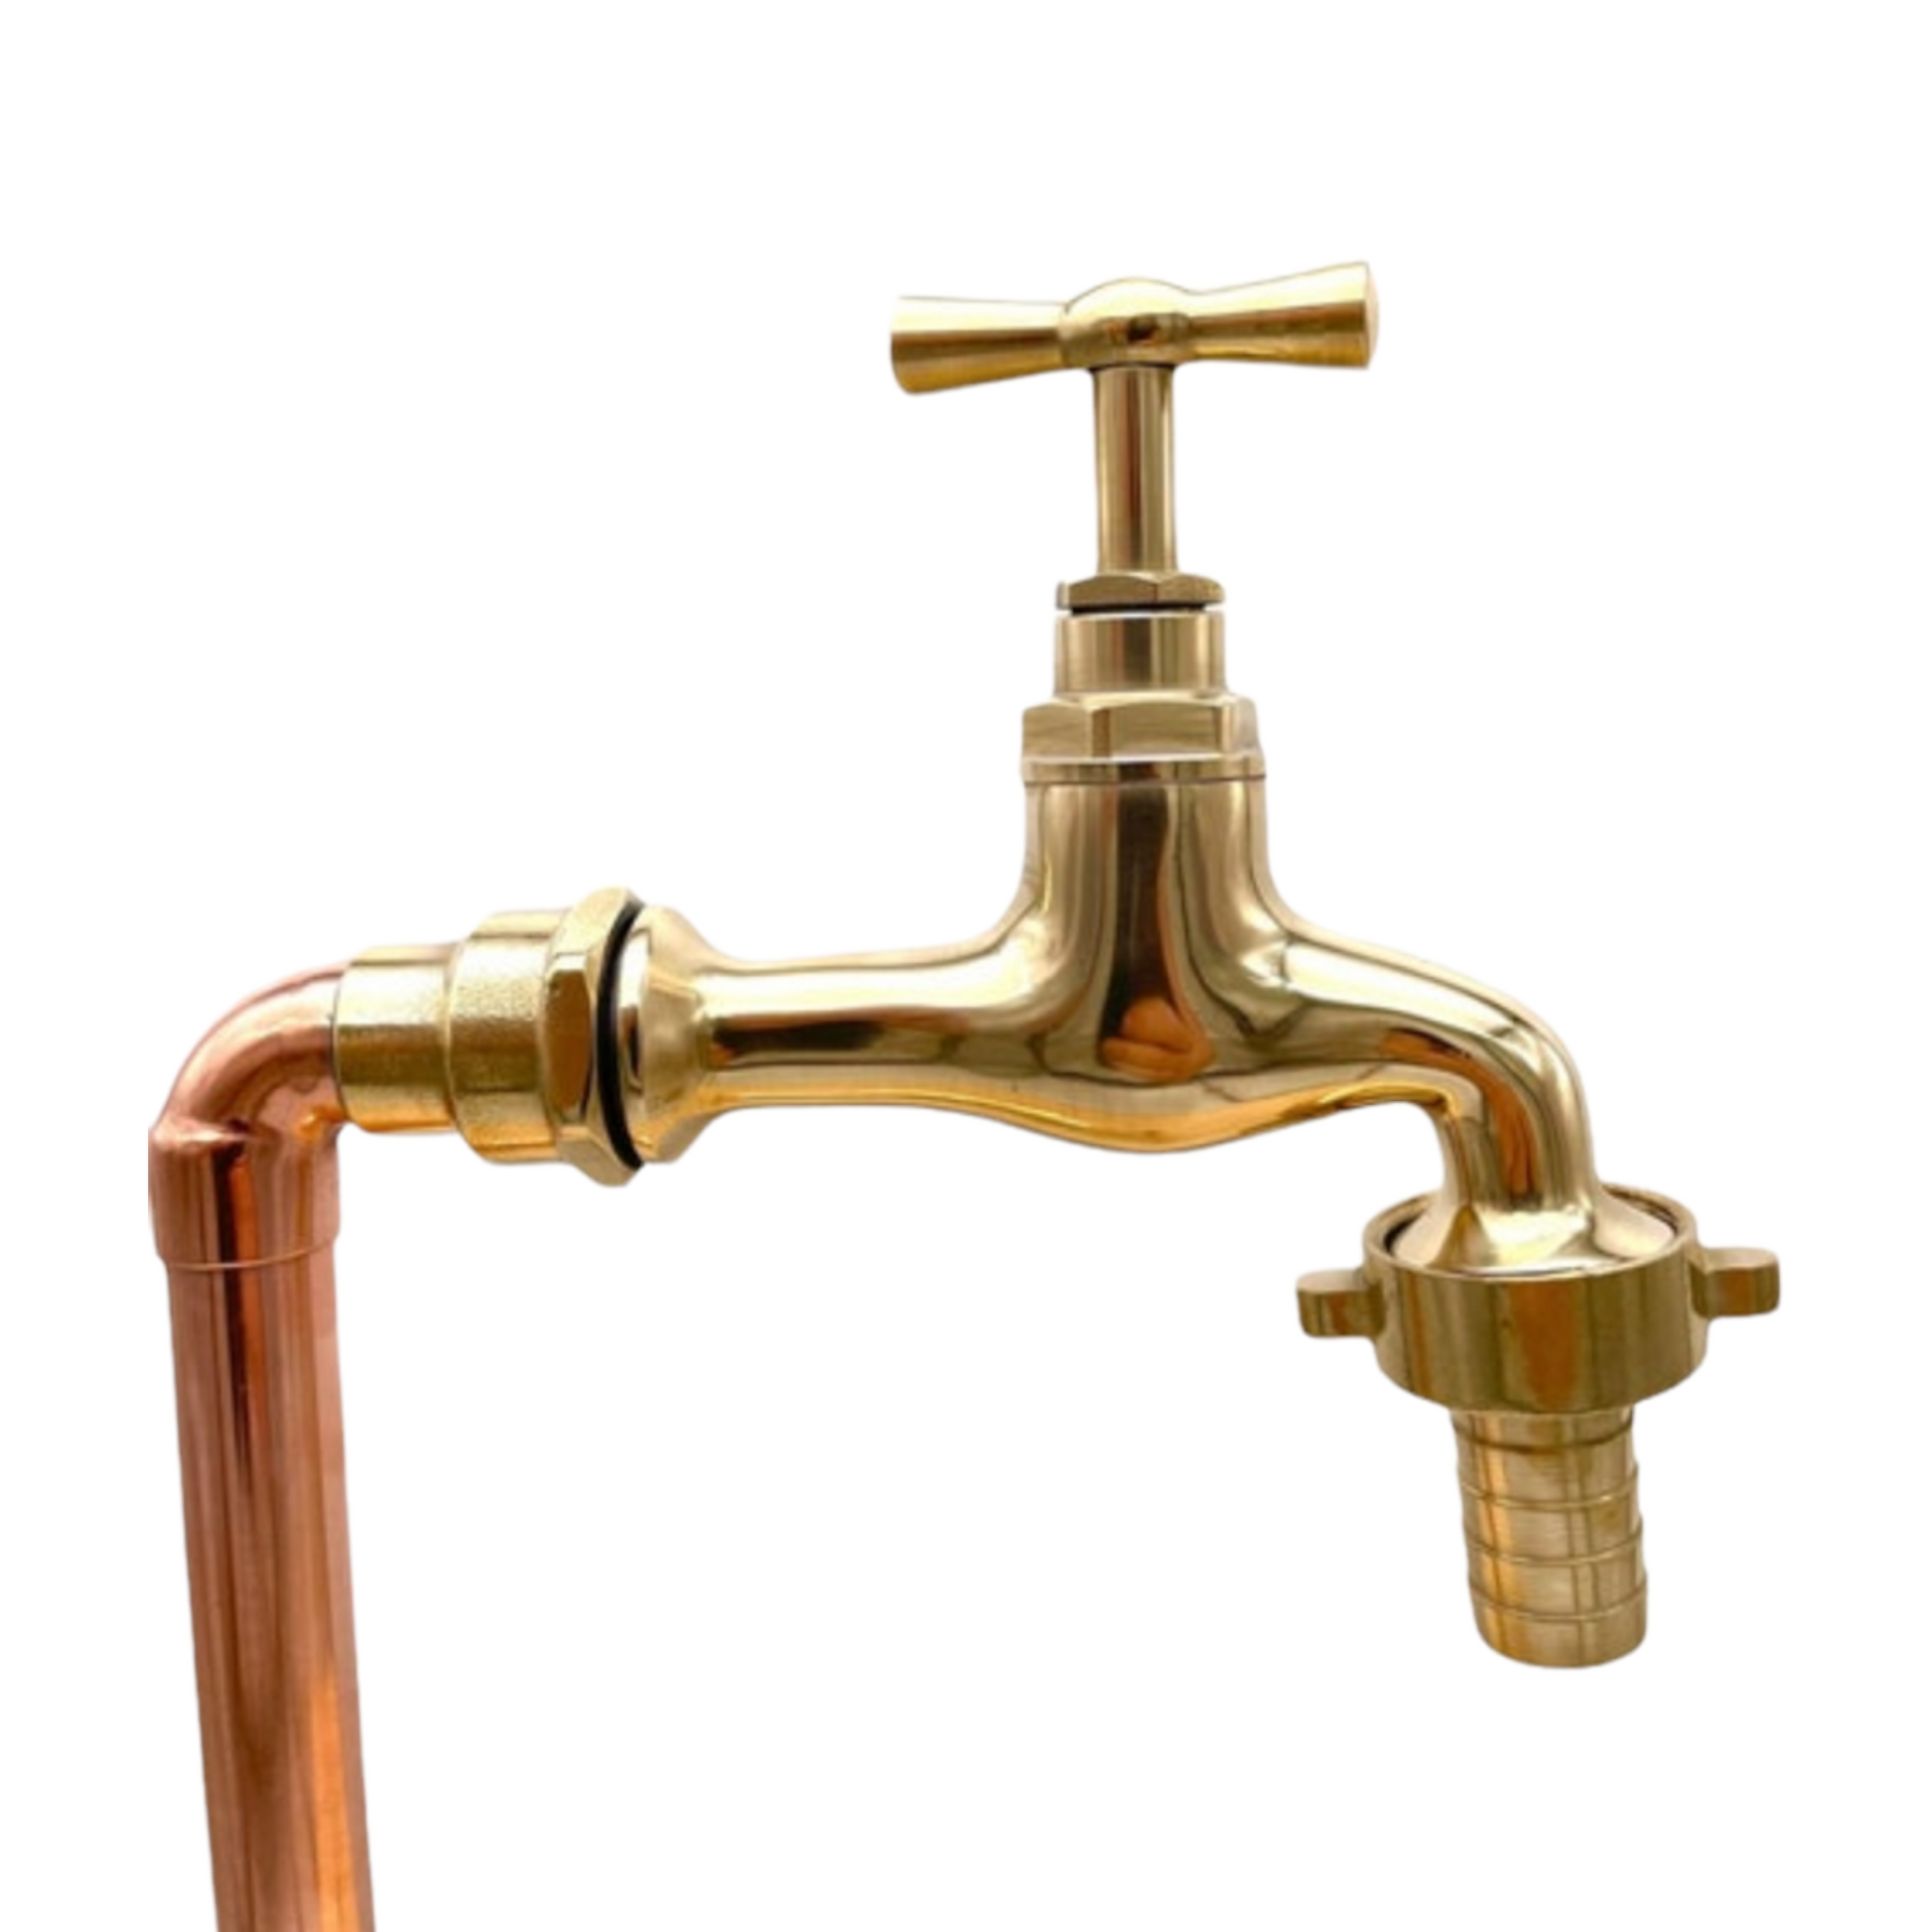 Image of a pair of copper and brass pillar taps  close up